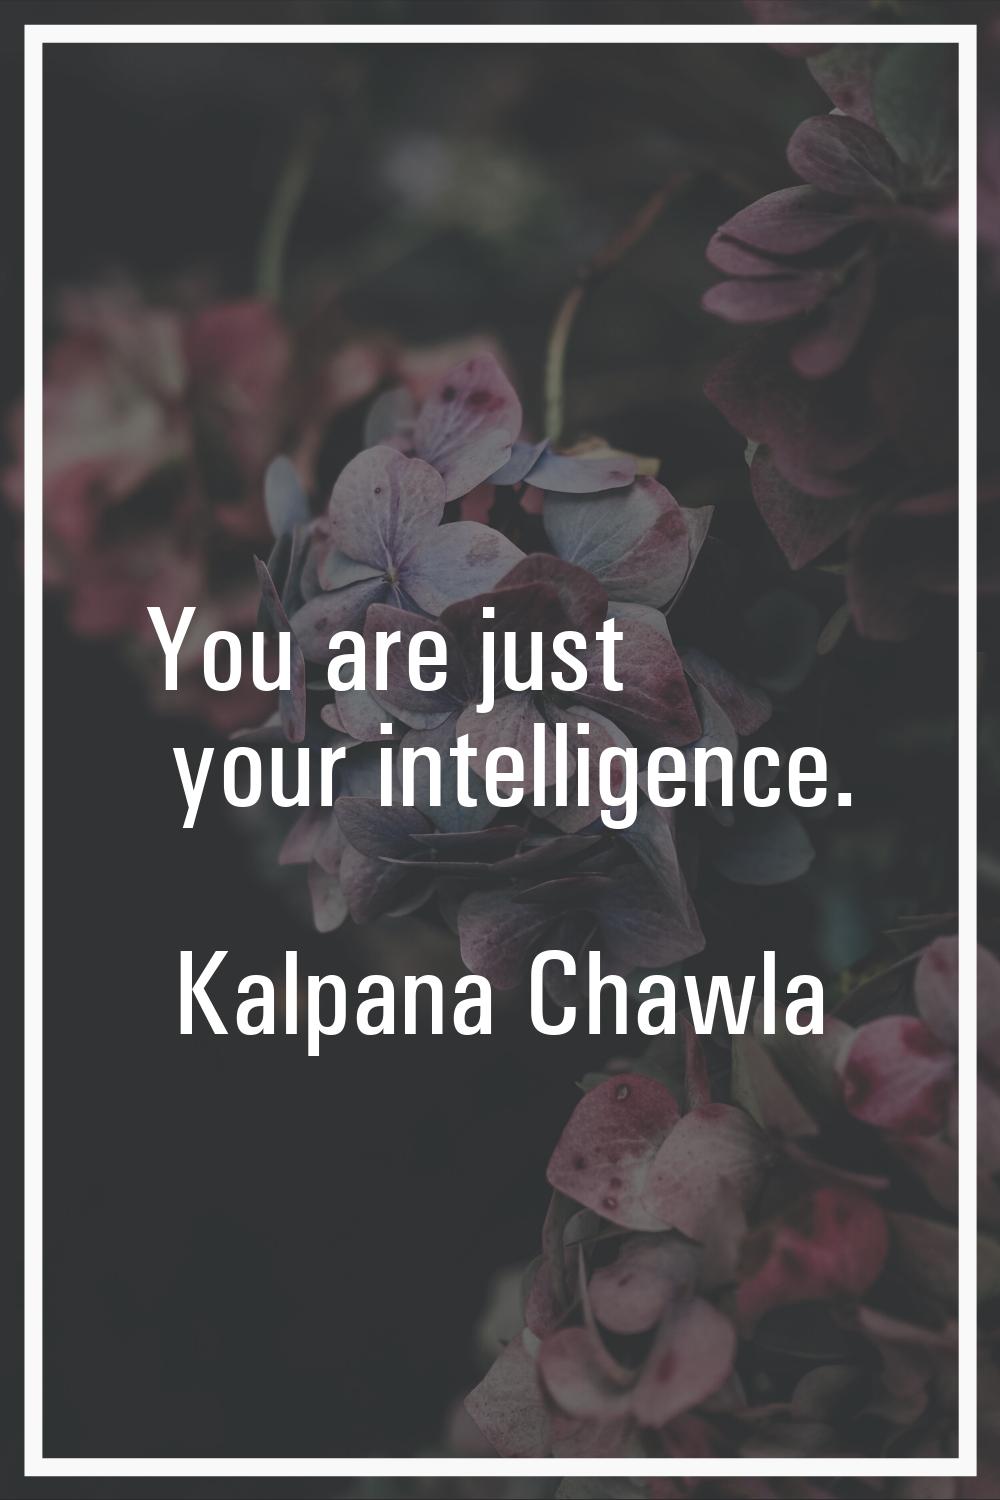 You are just your intelligence.